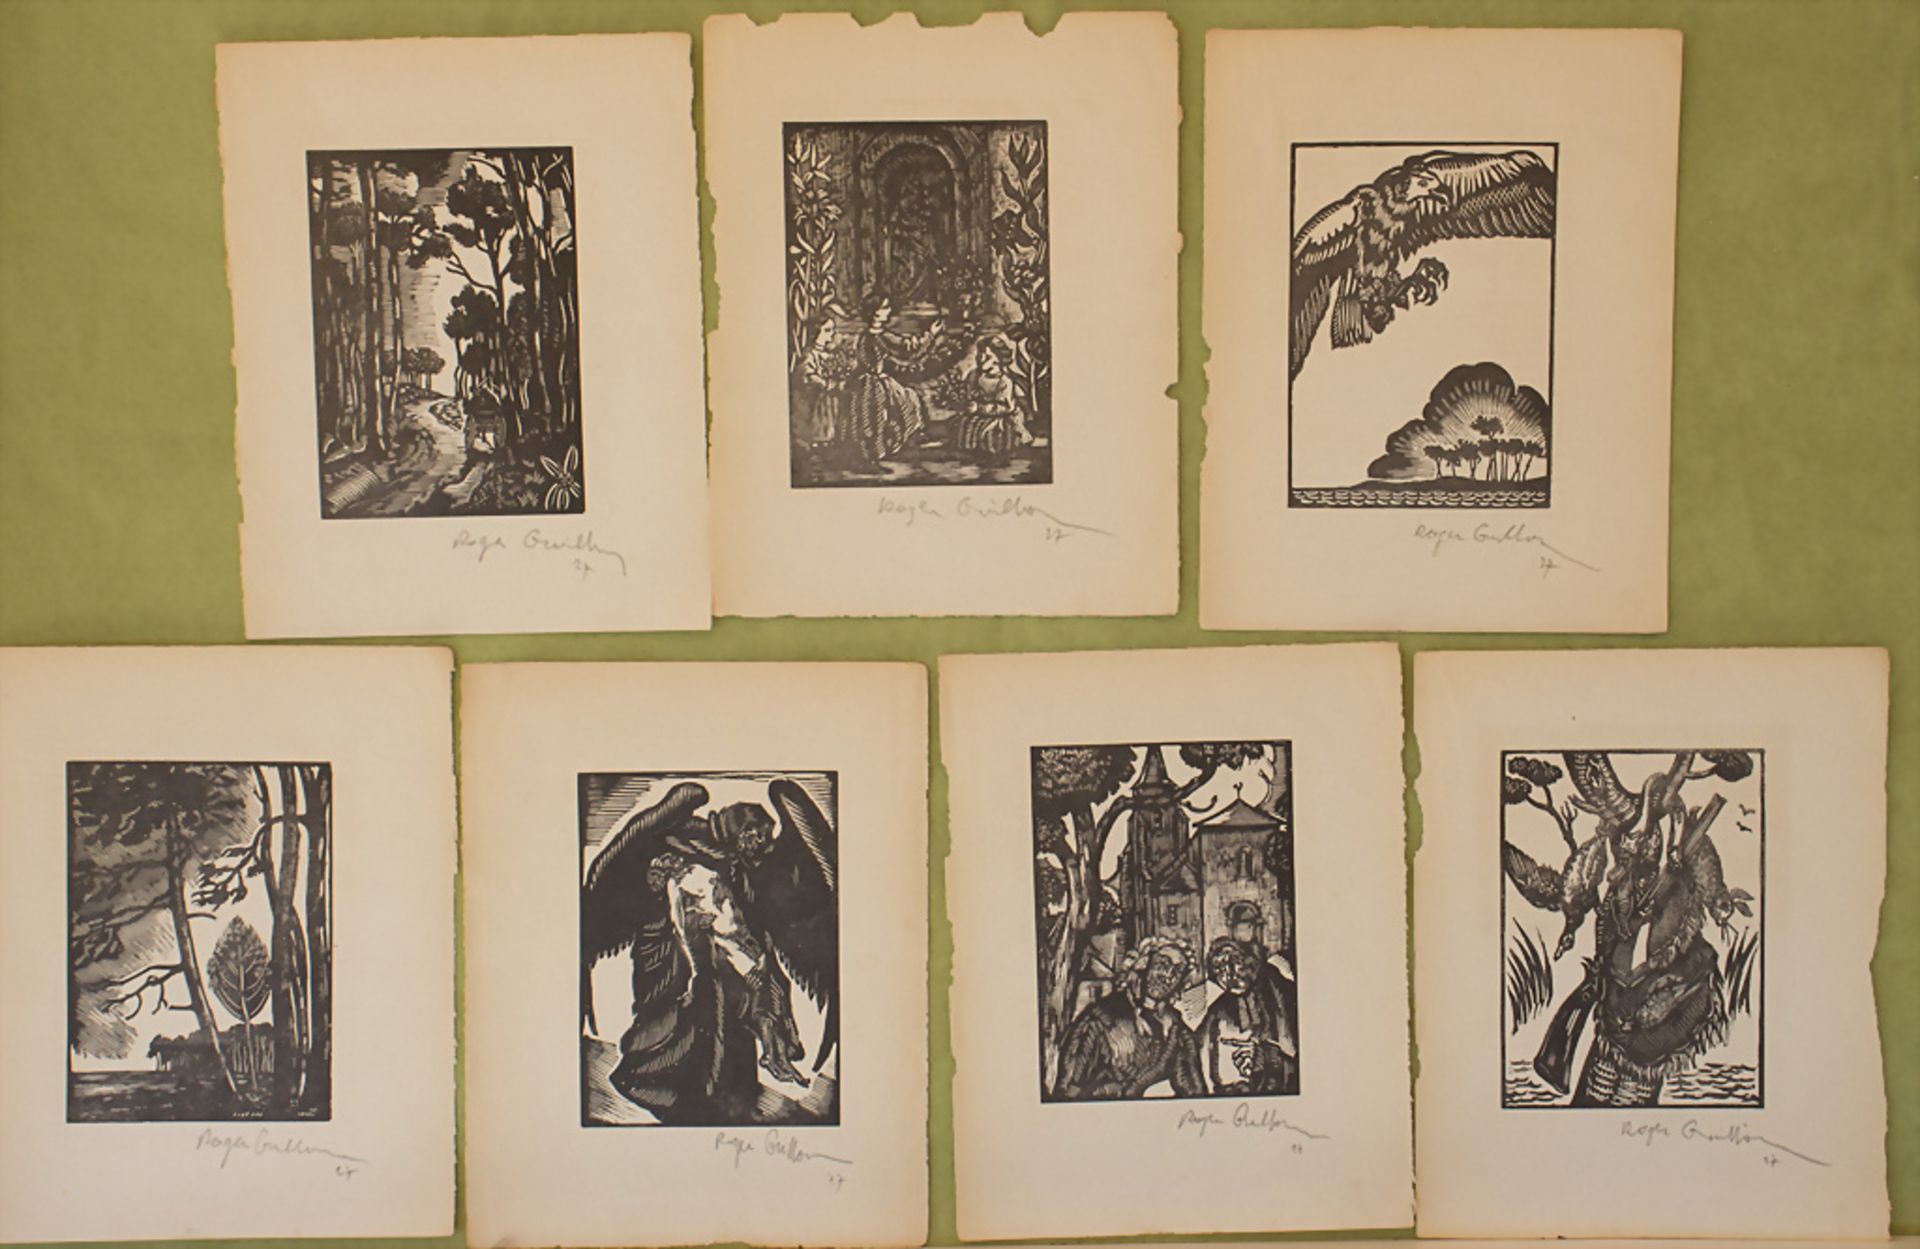 Roger Grillon (1881-1938), 7 Holzstiche / 7 wood engravings, 1927